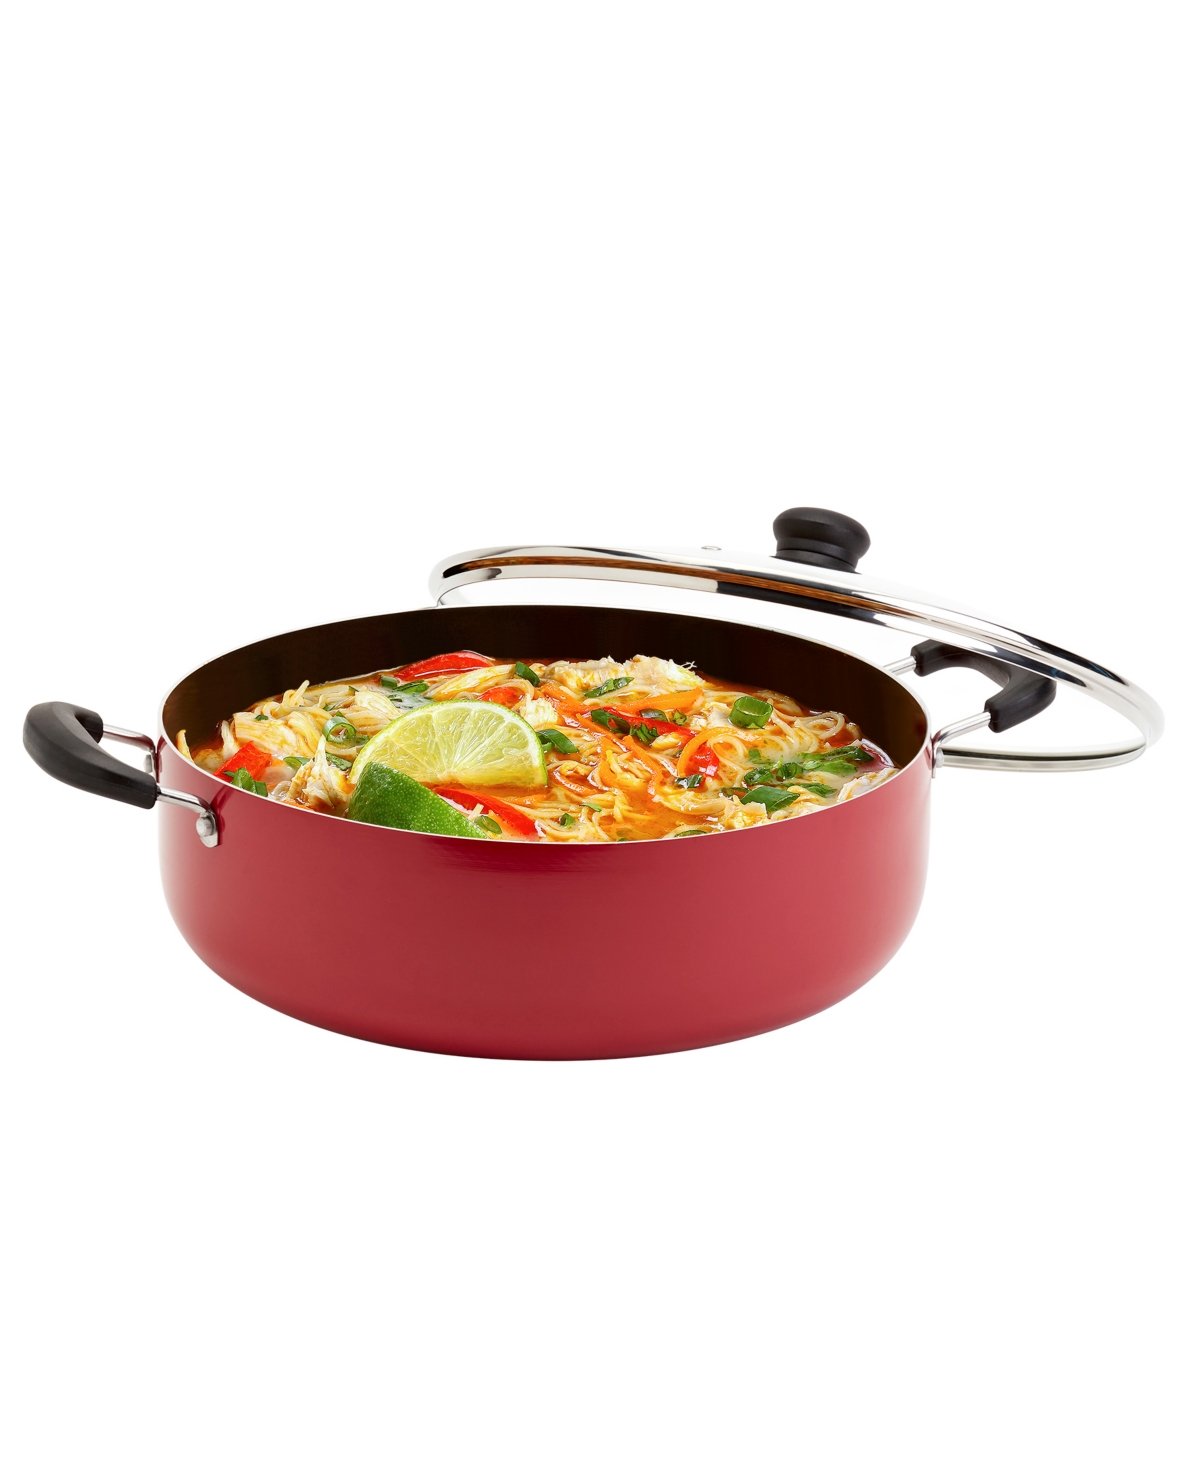 Infuse Asian Non Stick Aluminium 10.5 Quart Family Cooker In Red